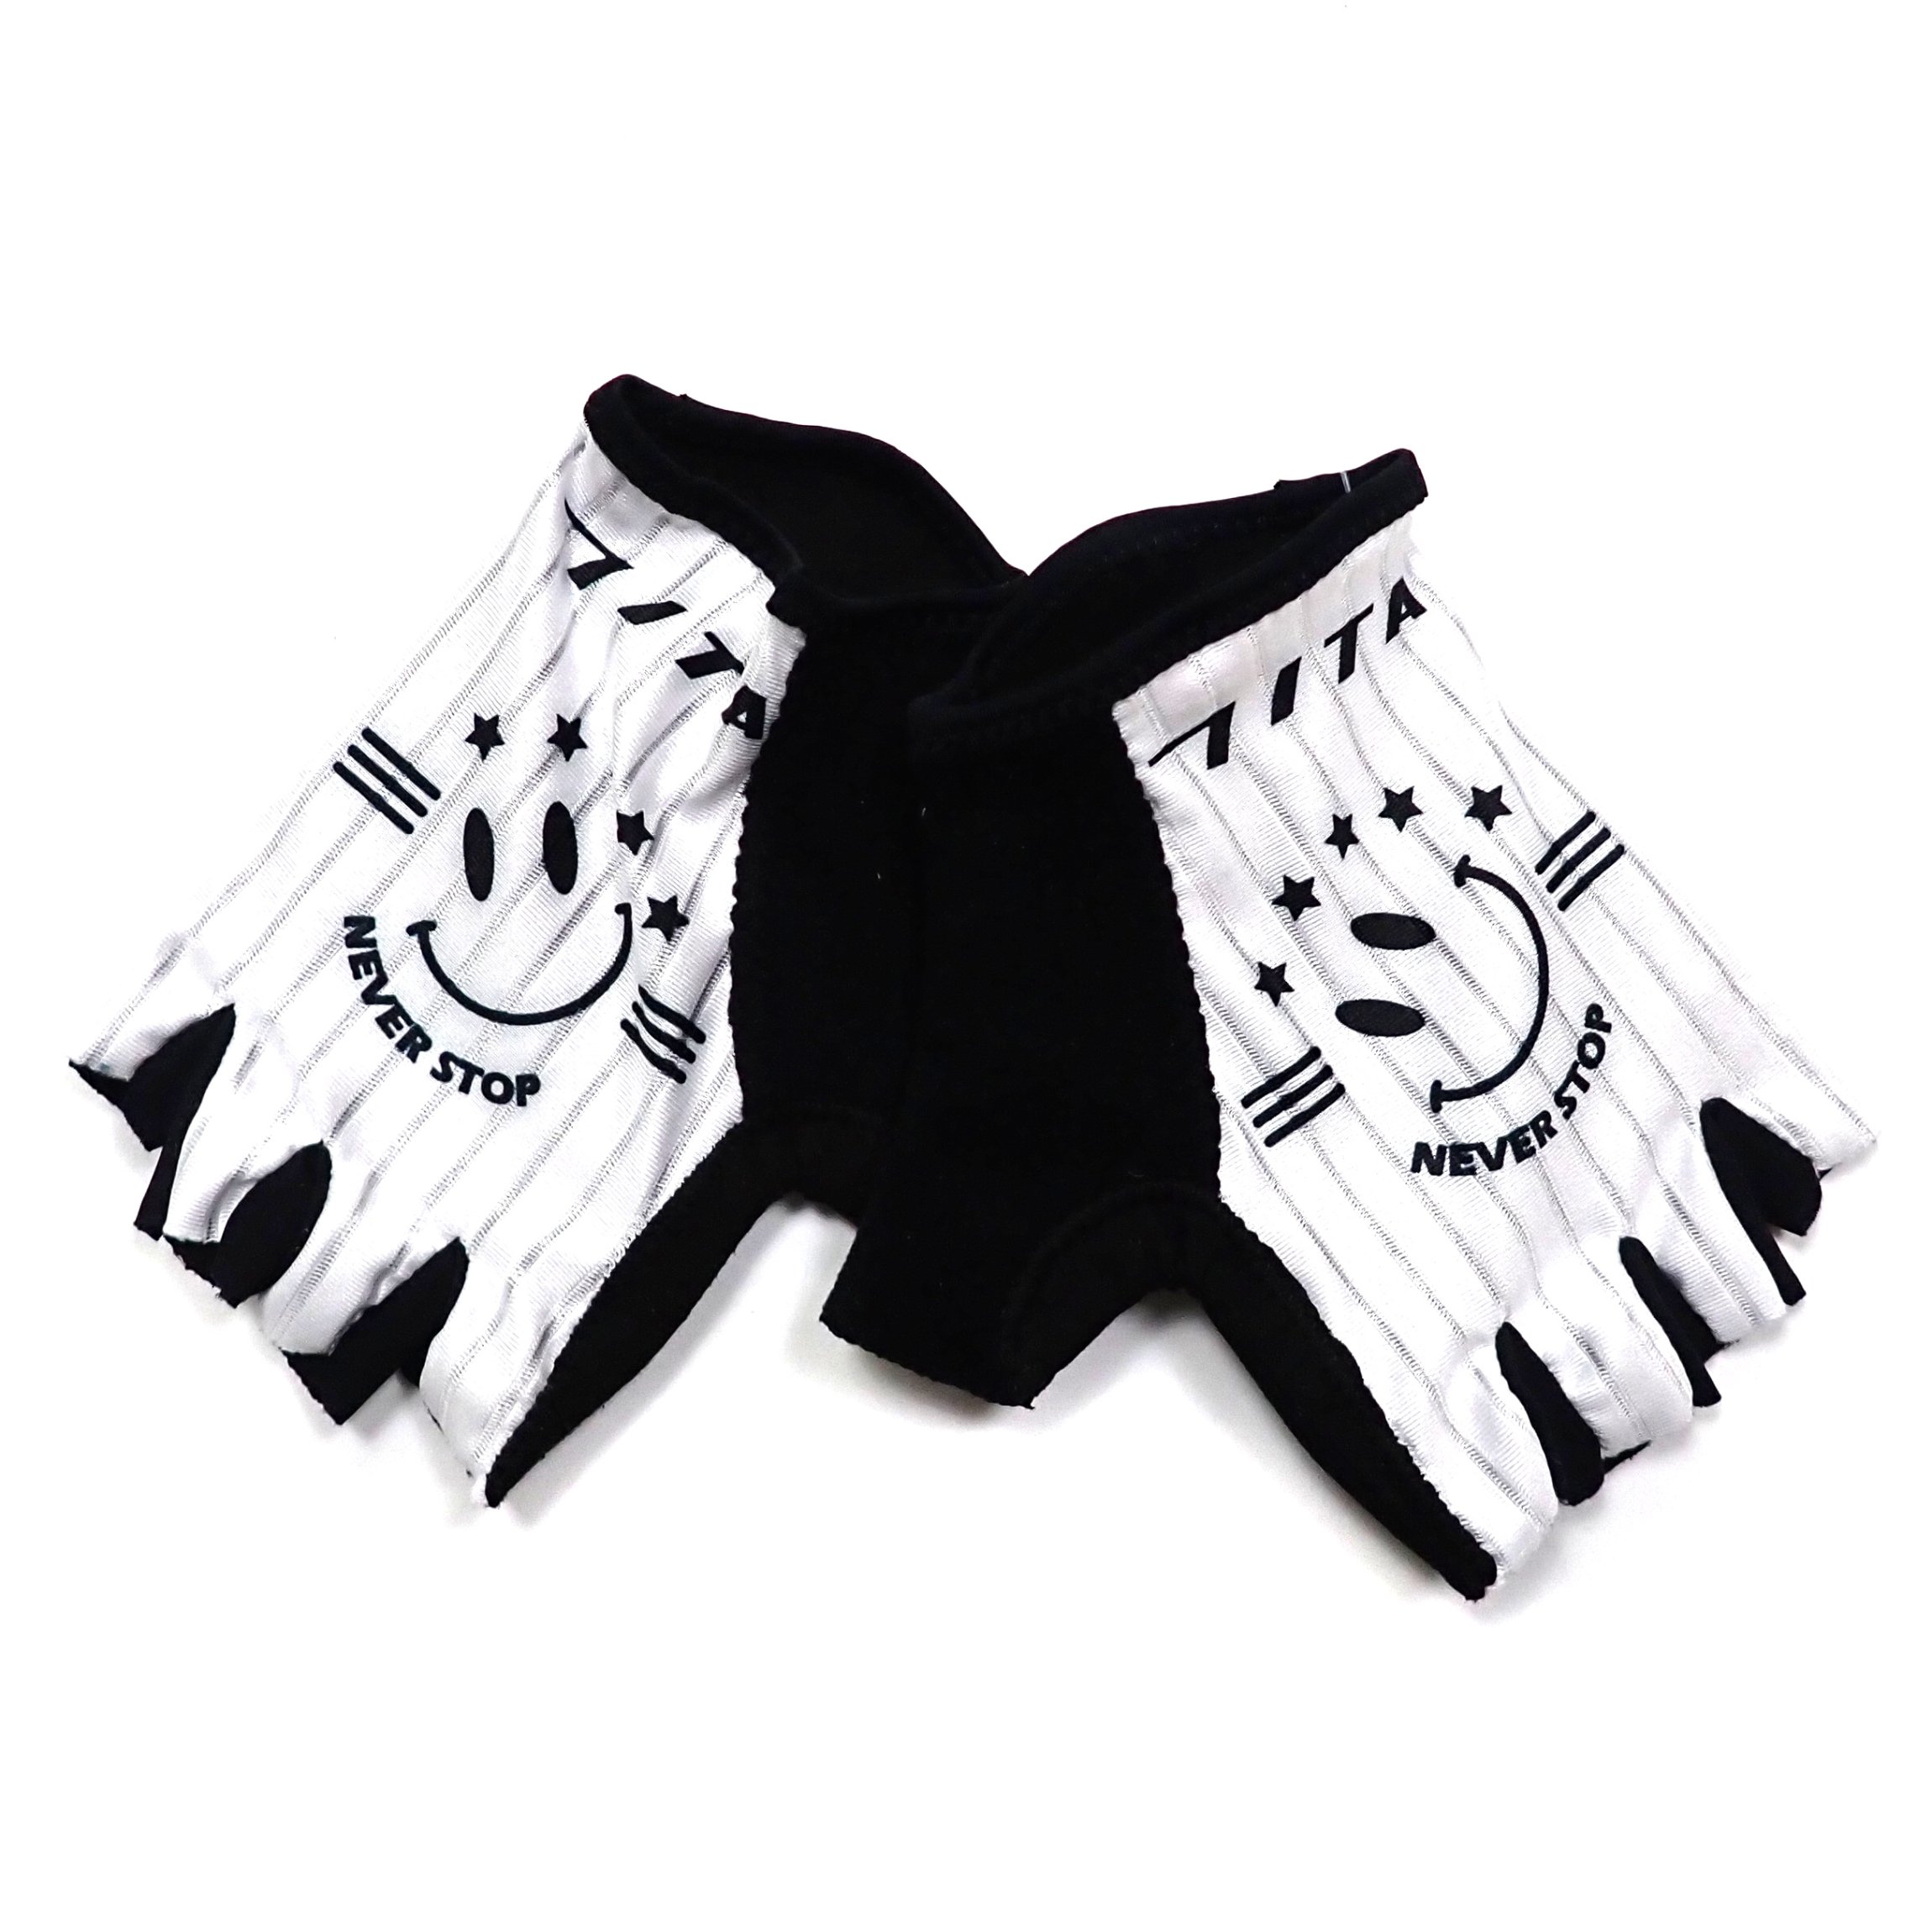 7ITA Smile Gloves White<img class='new_mark_img2' src='https://img.shop-pro.jp/img/new/icons14.gif' style='border:none;display:inline;margin:0px;padding:0px;width:auto;' />